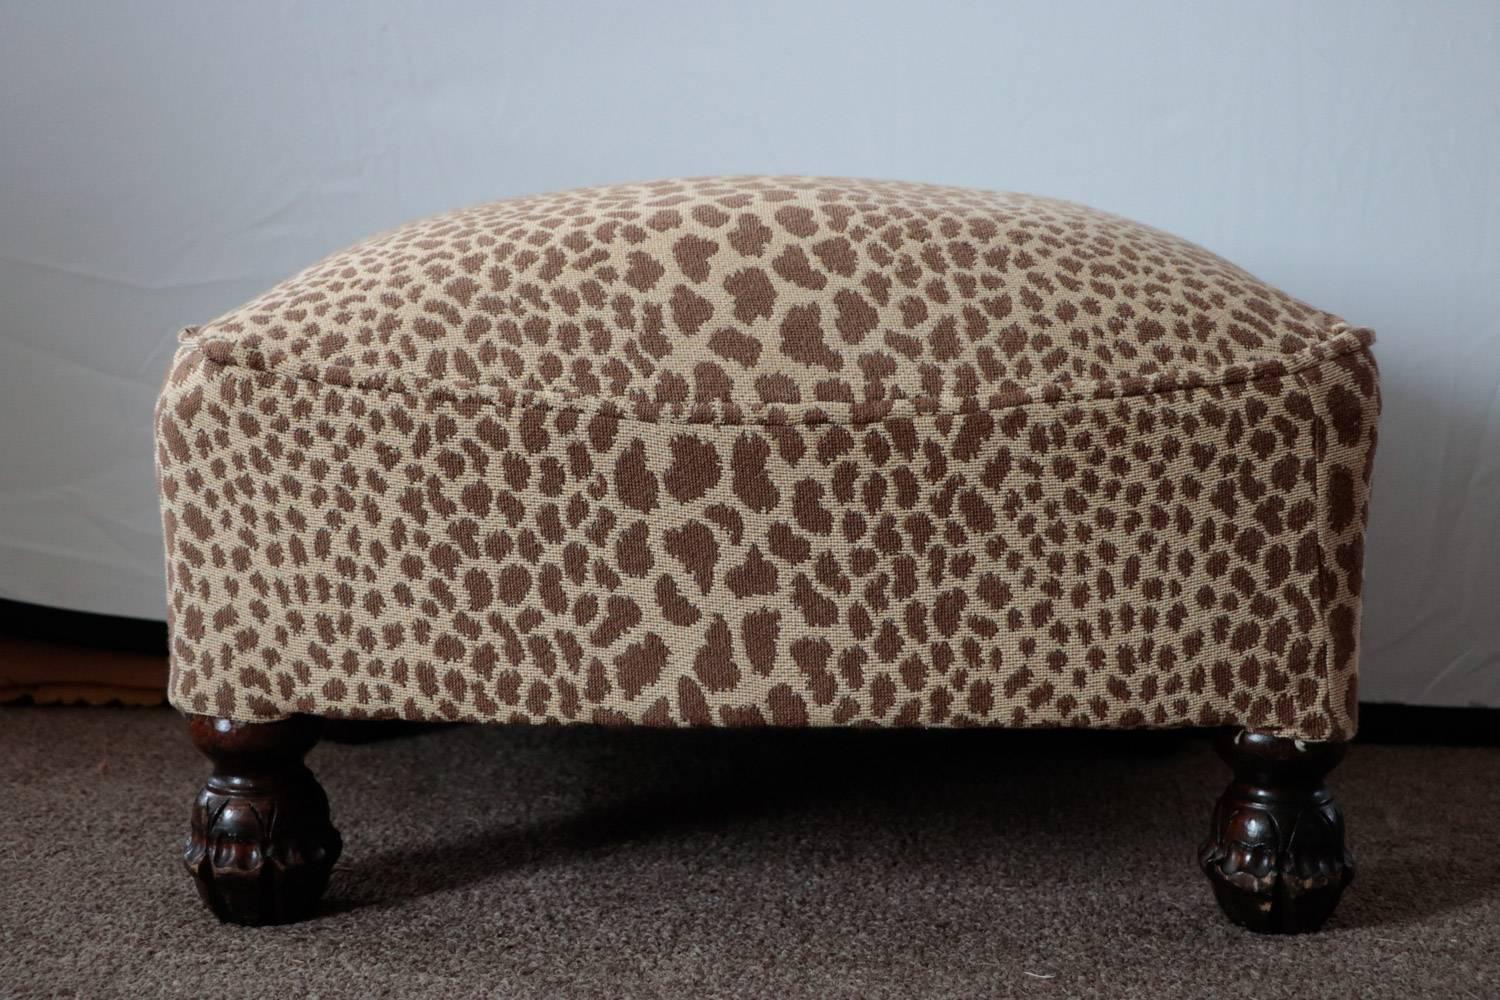 French ON SALE NOW!  Hot to Trot 1950 Mid Mod Cheetah Ottoman 